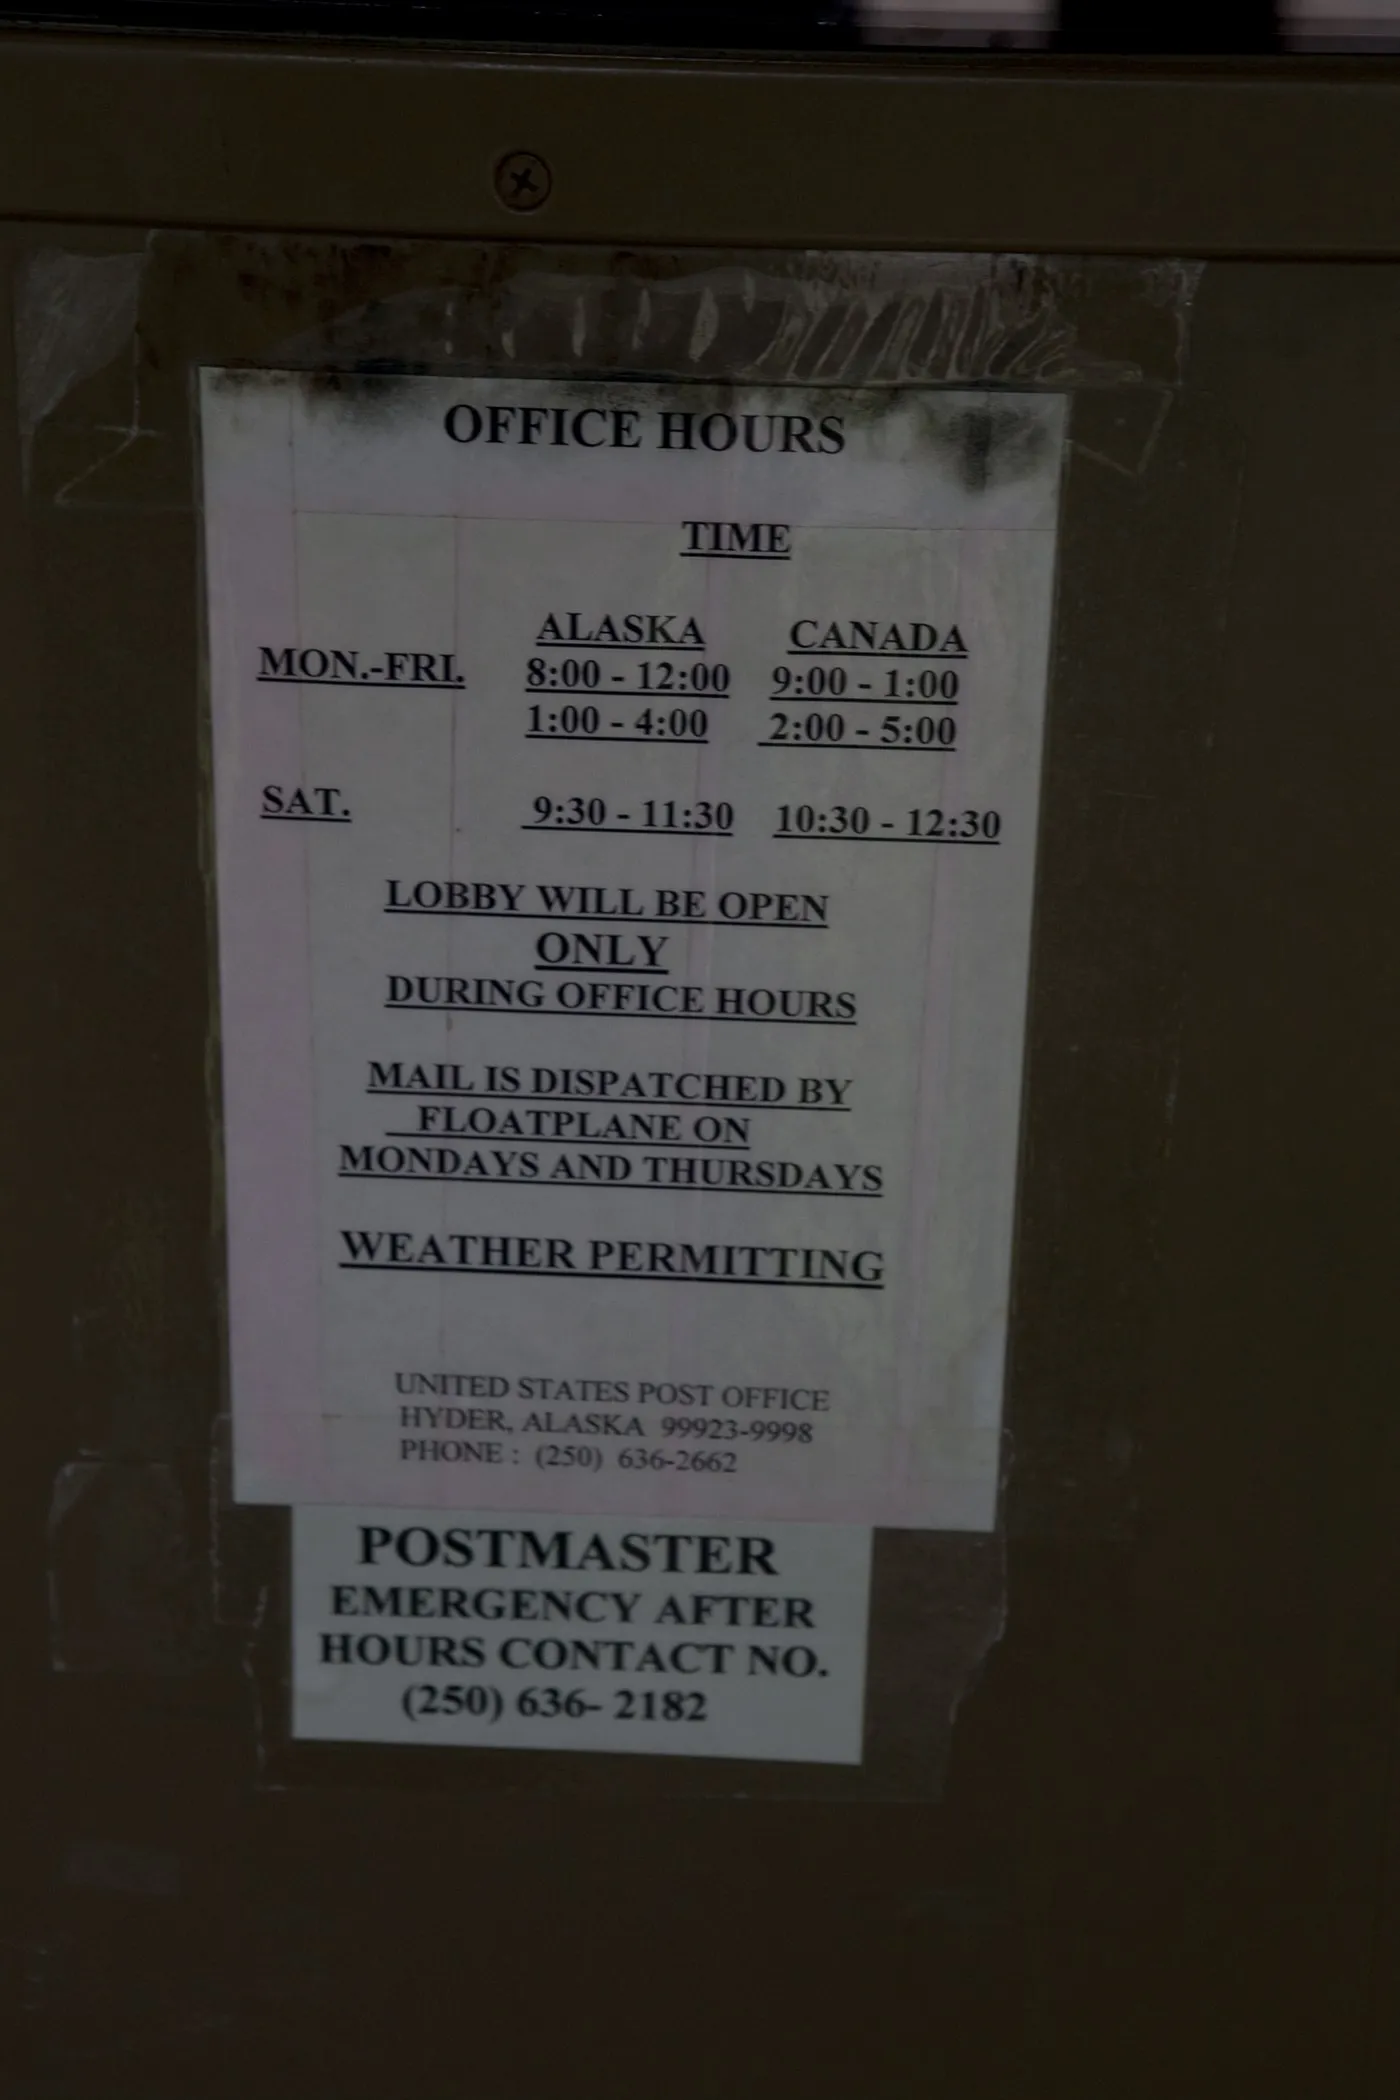 Mail is dispatched by floatplane sign at the Hyder, Alaska Post Office.